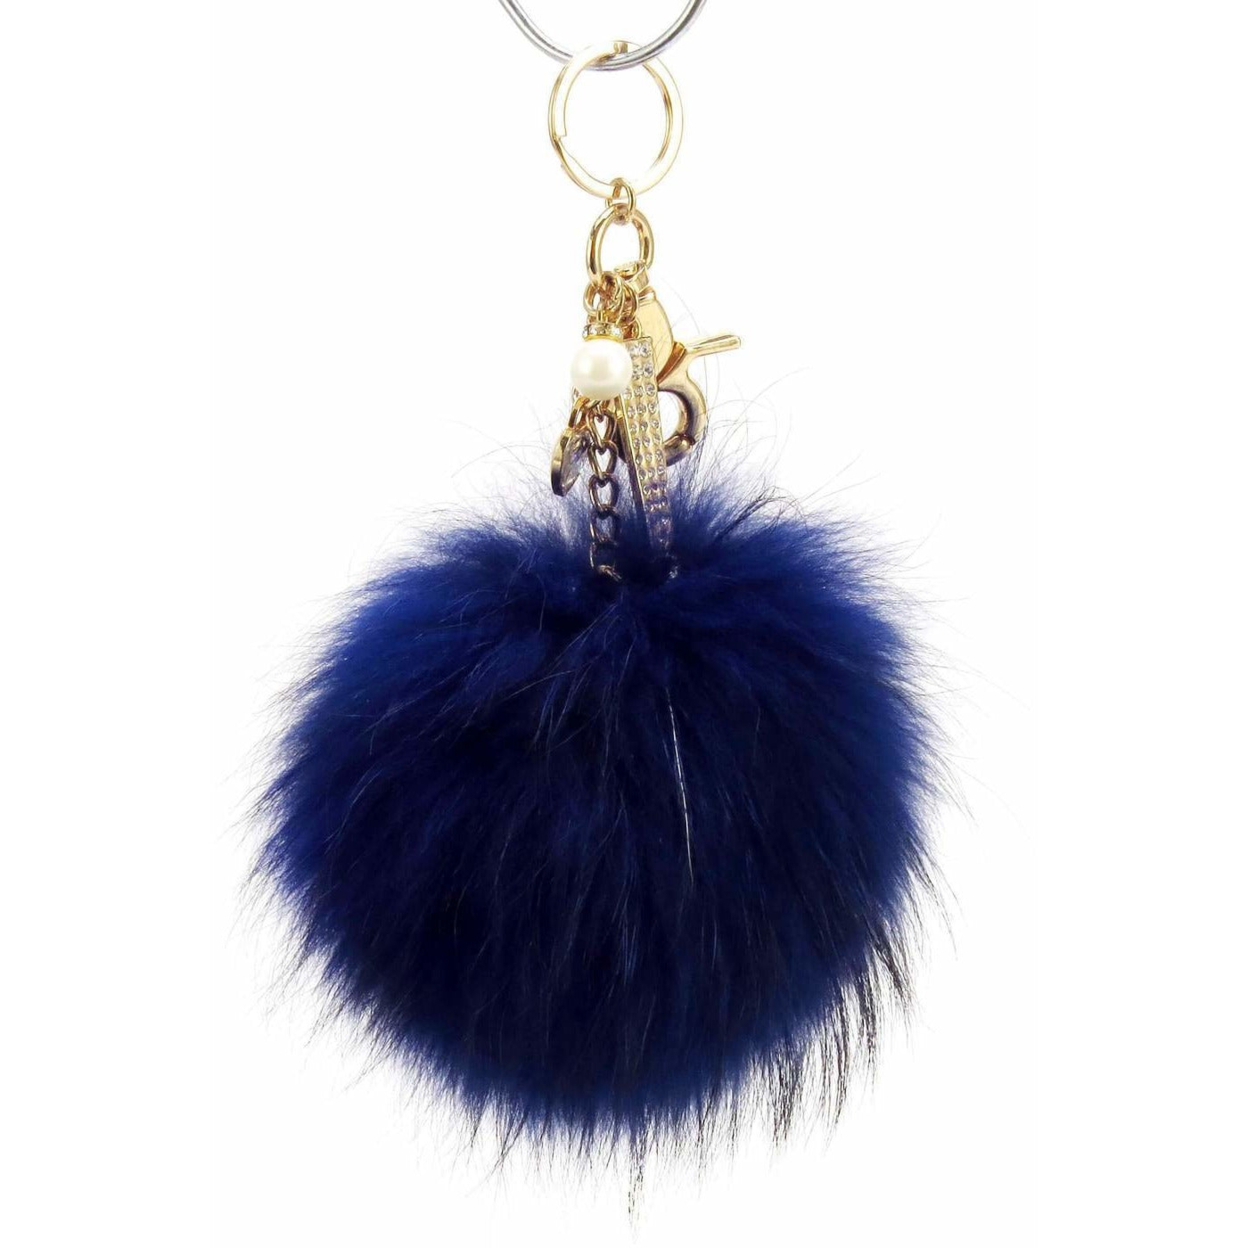 Real Fur Puff Ball Pom-Pom 6 Accessory Dangle Purse Charm - Navy Dark Blue With Gold Hardware